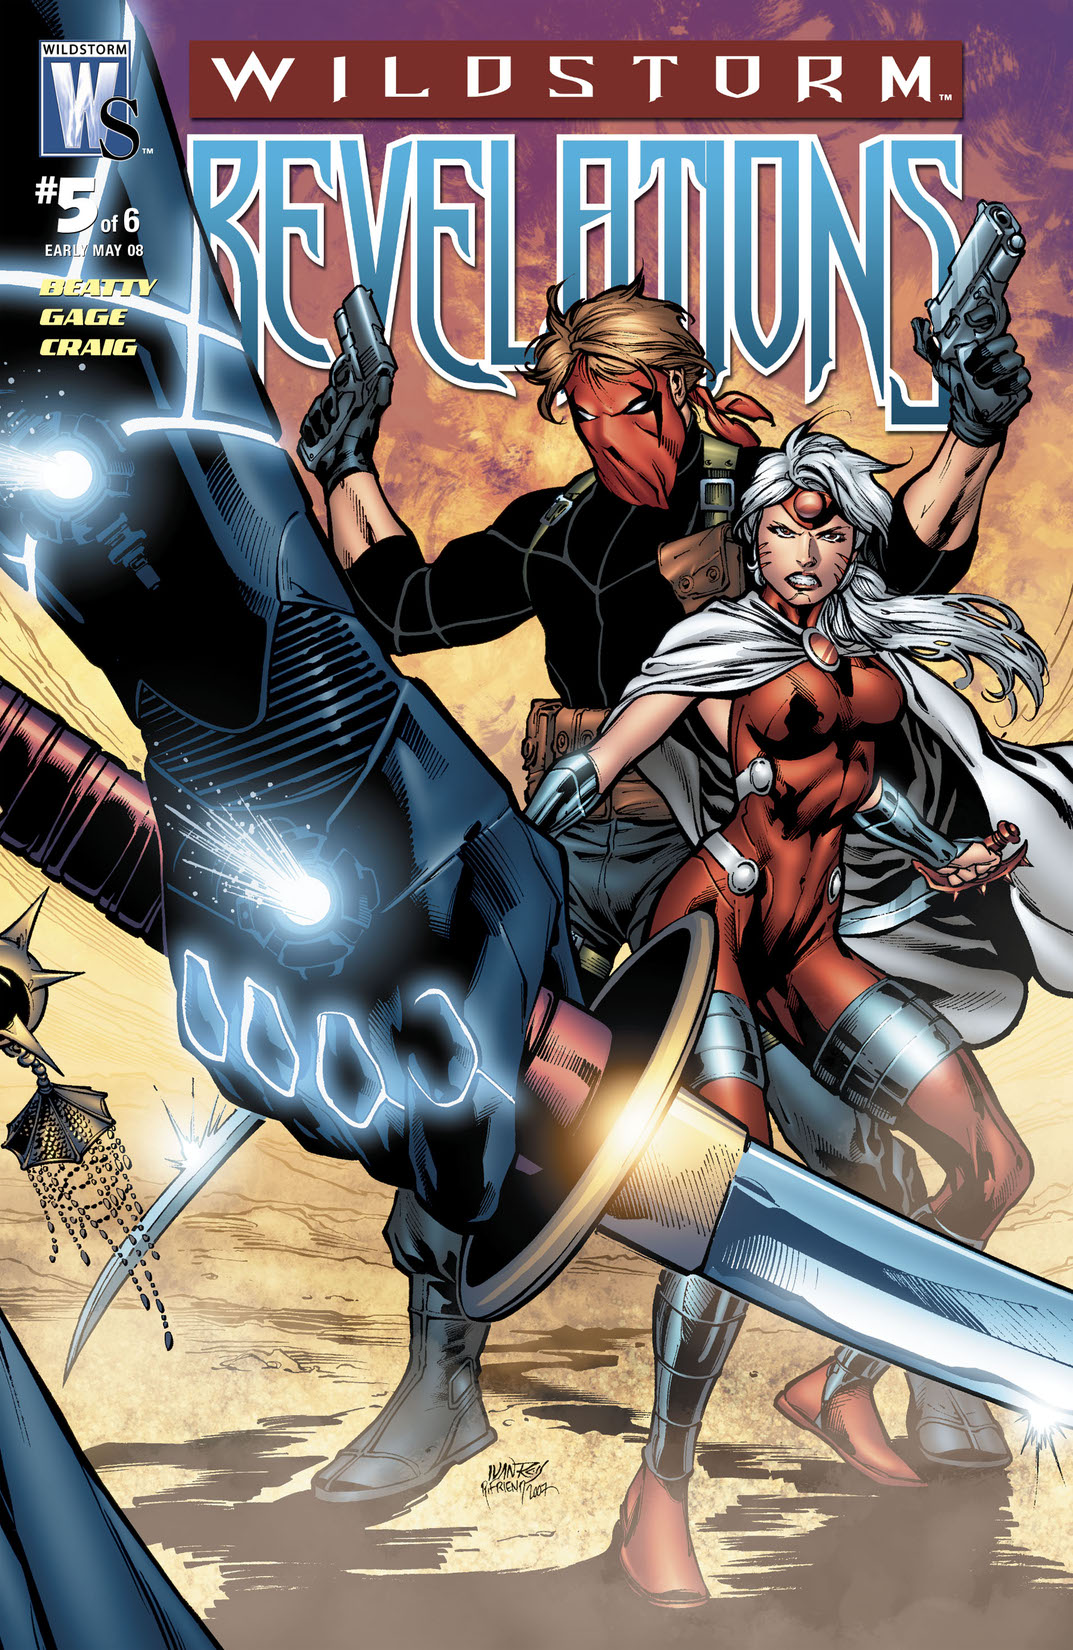 Wildstorm Revelations #5 preview images